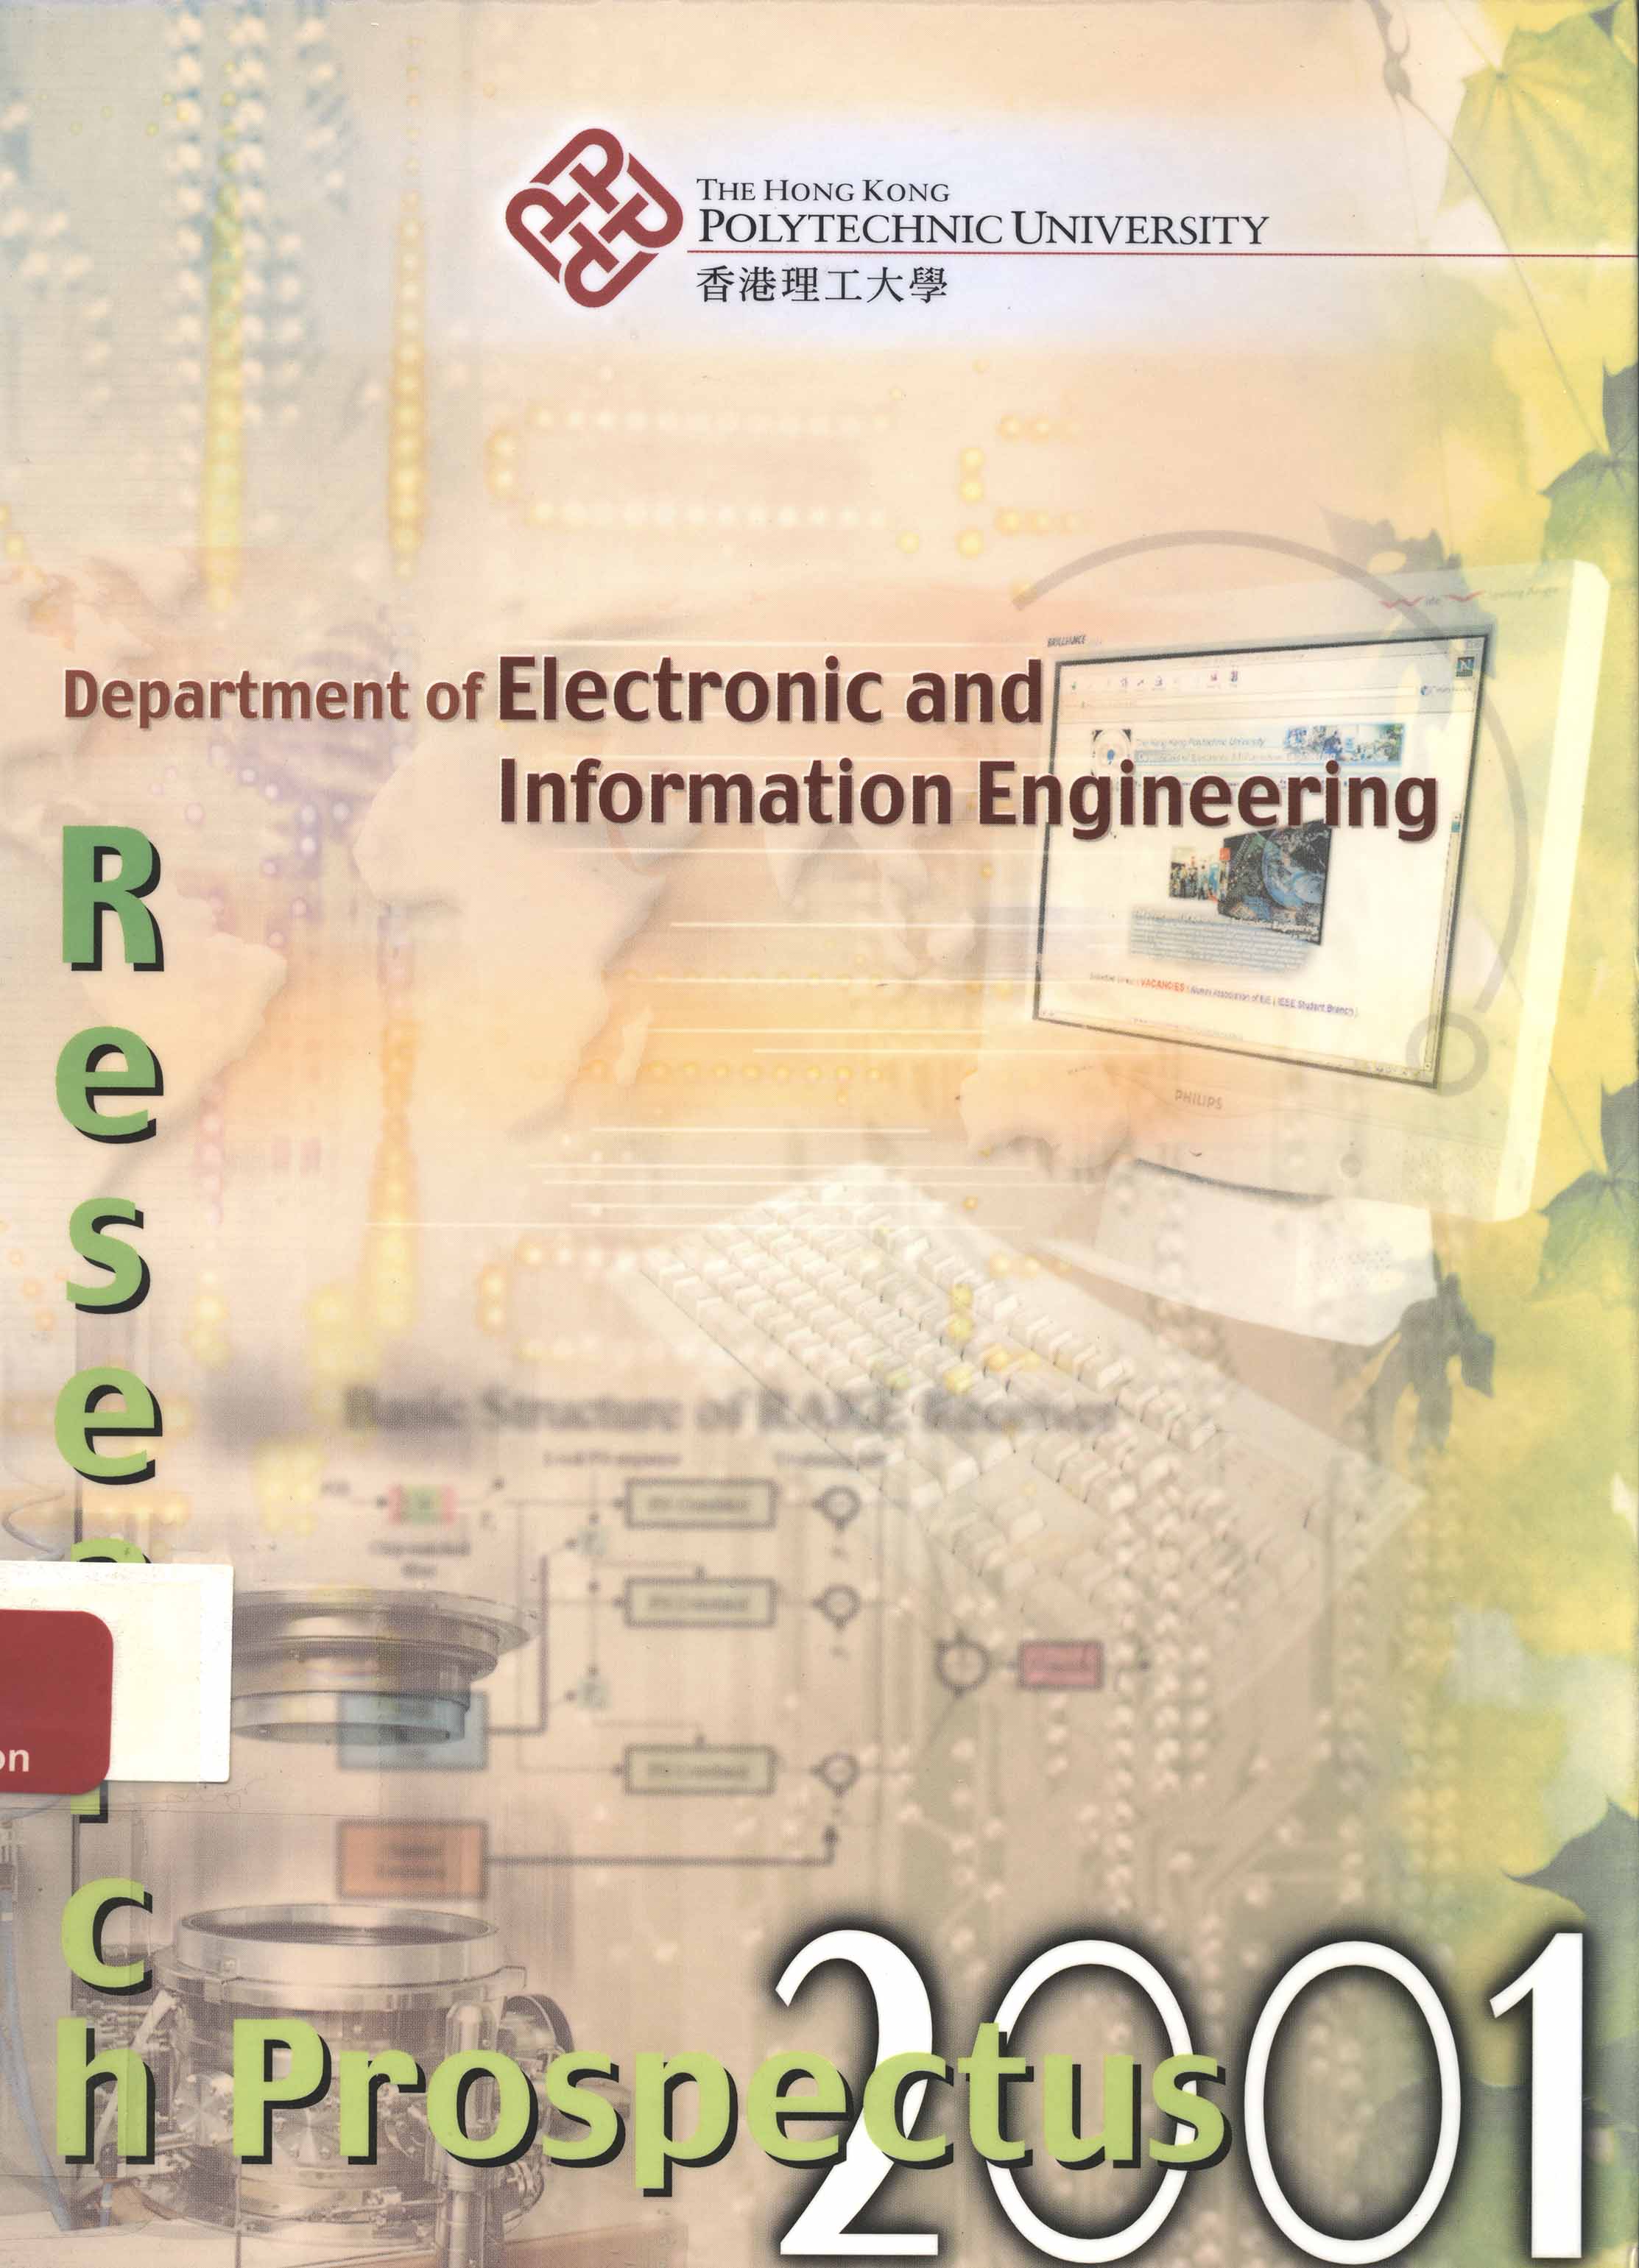 Research Prospectus 2001 (Dept. of Electronic and Information Engineering)